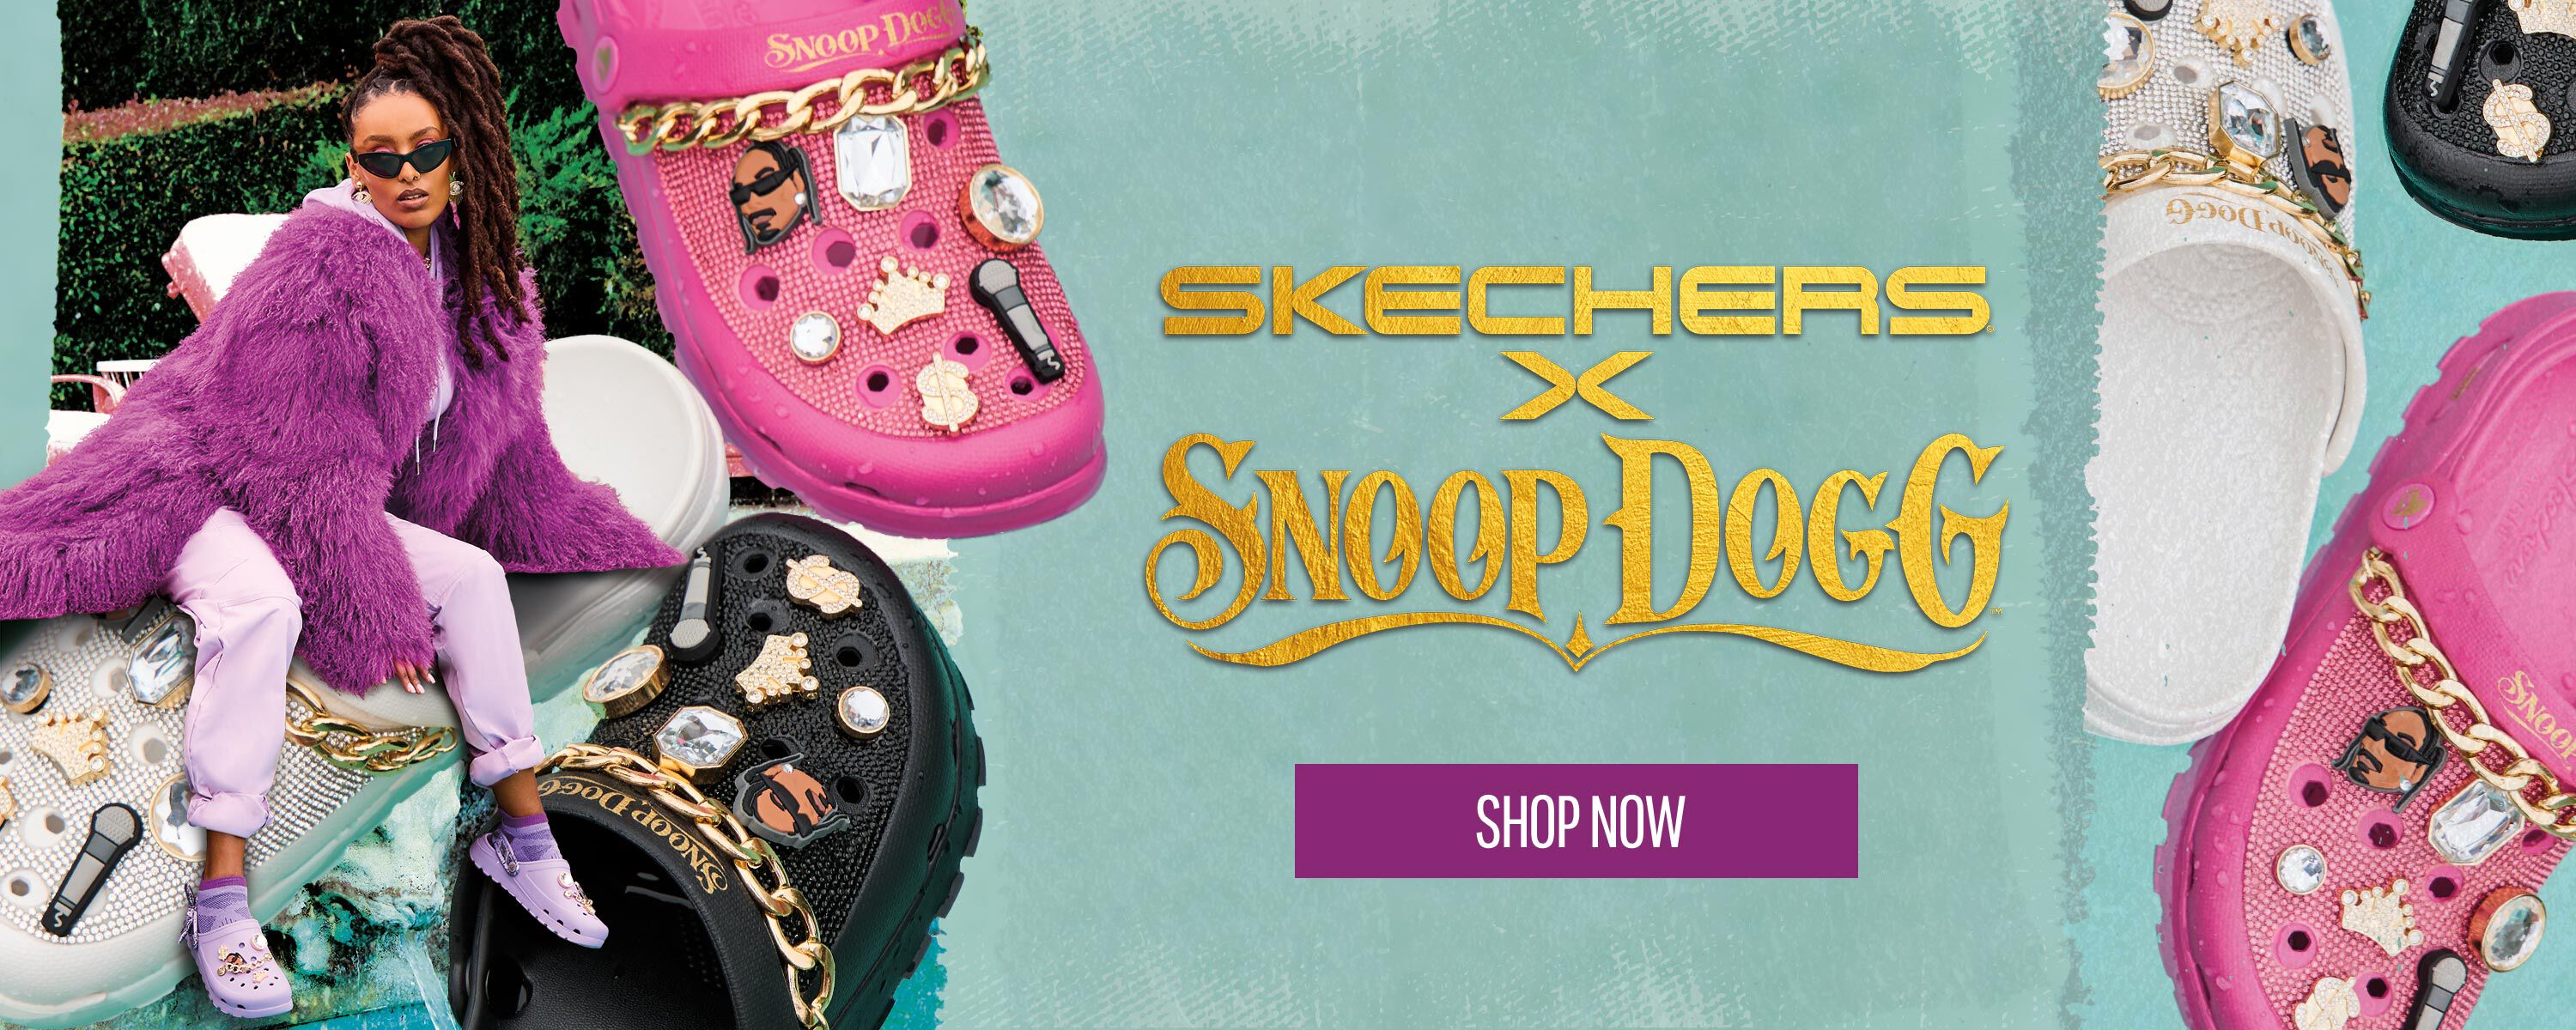 SKECHERS - Forget about coordinating outfits! Match your couple D